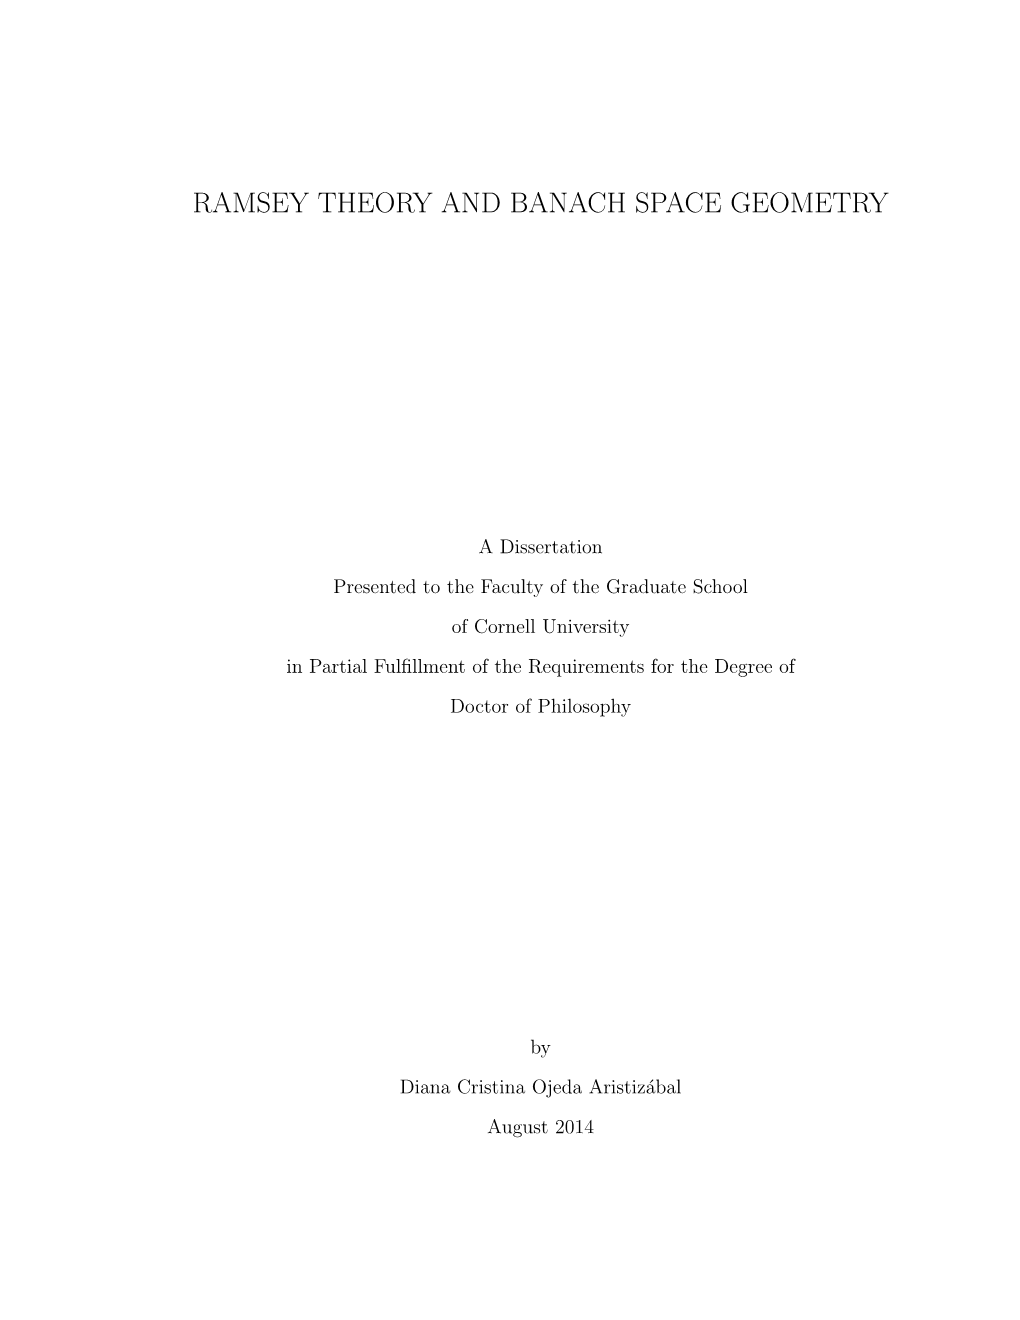 Ramsey Theory and Banach Space Geometry